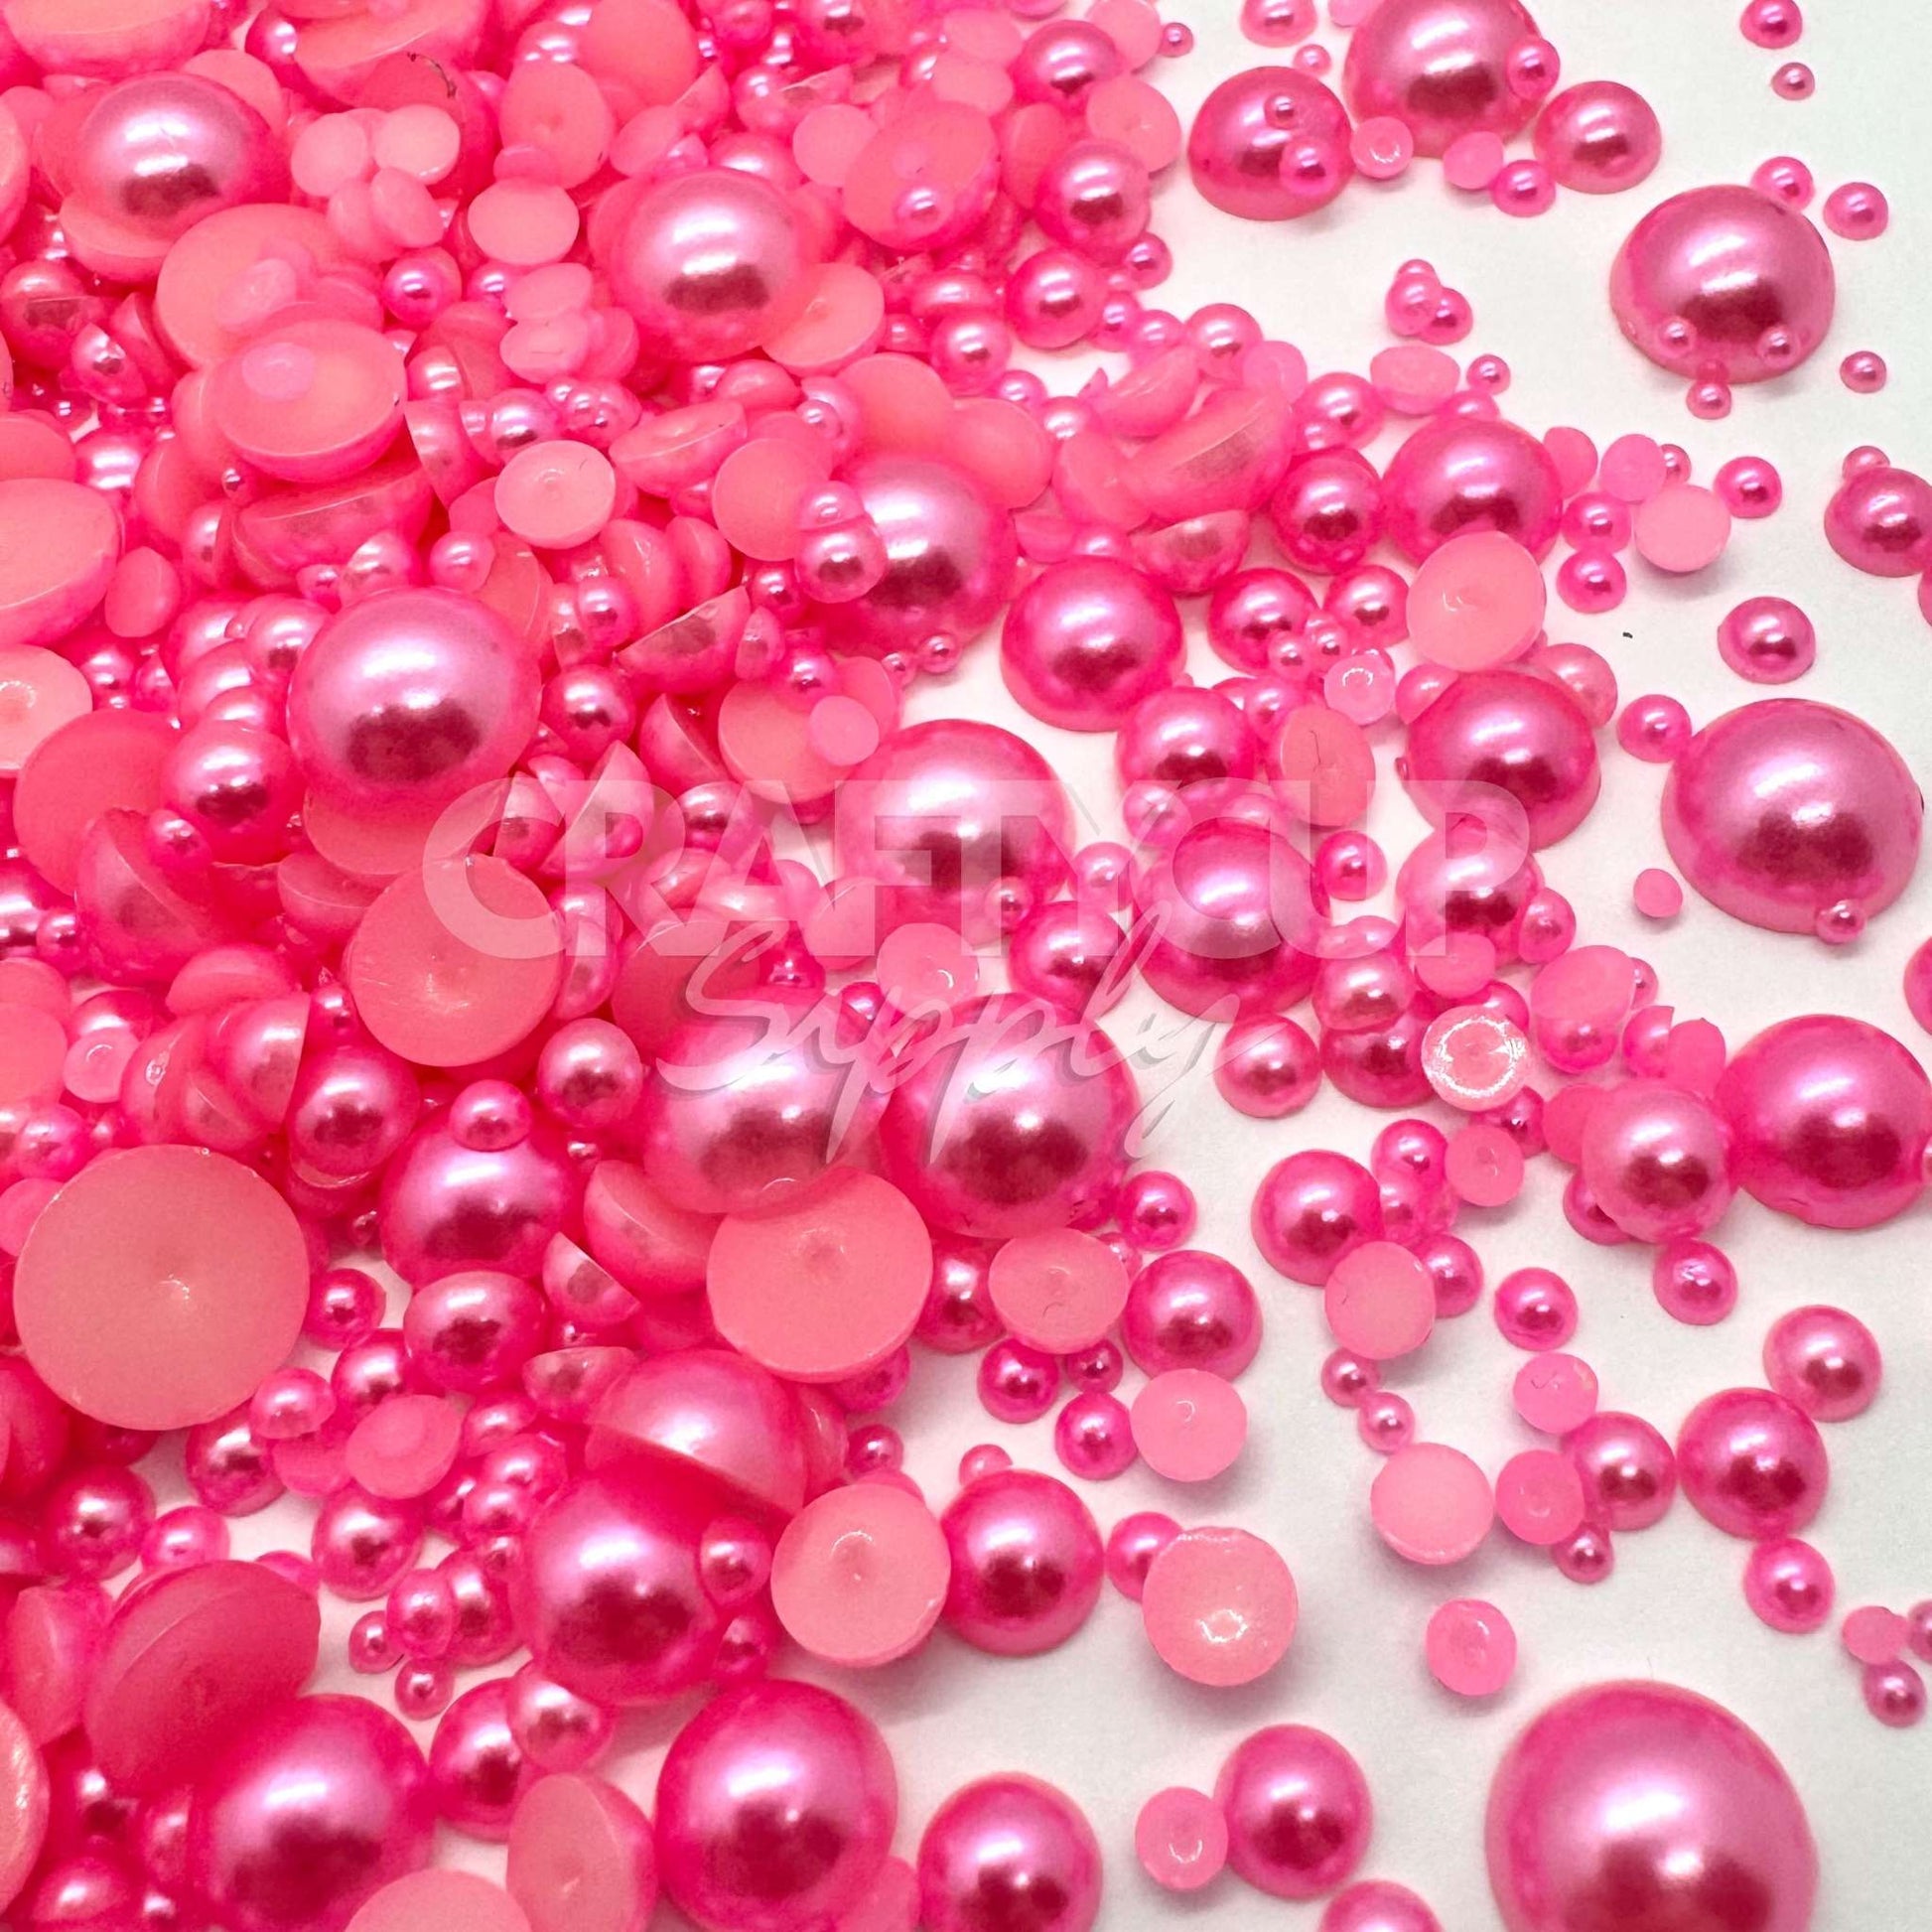 pink pearls for crafting projects